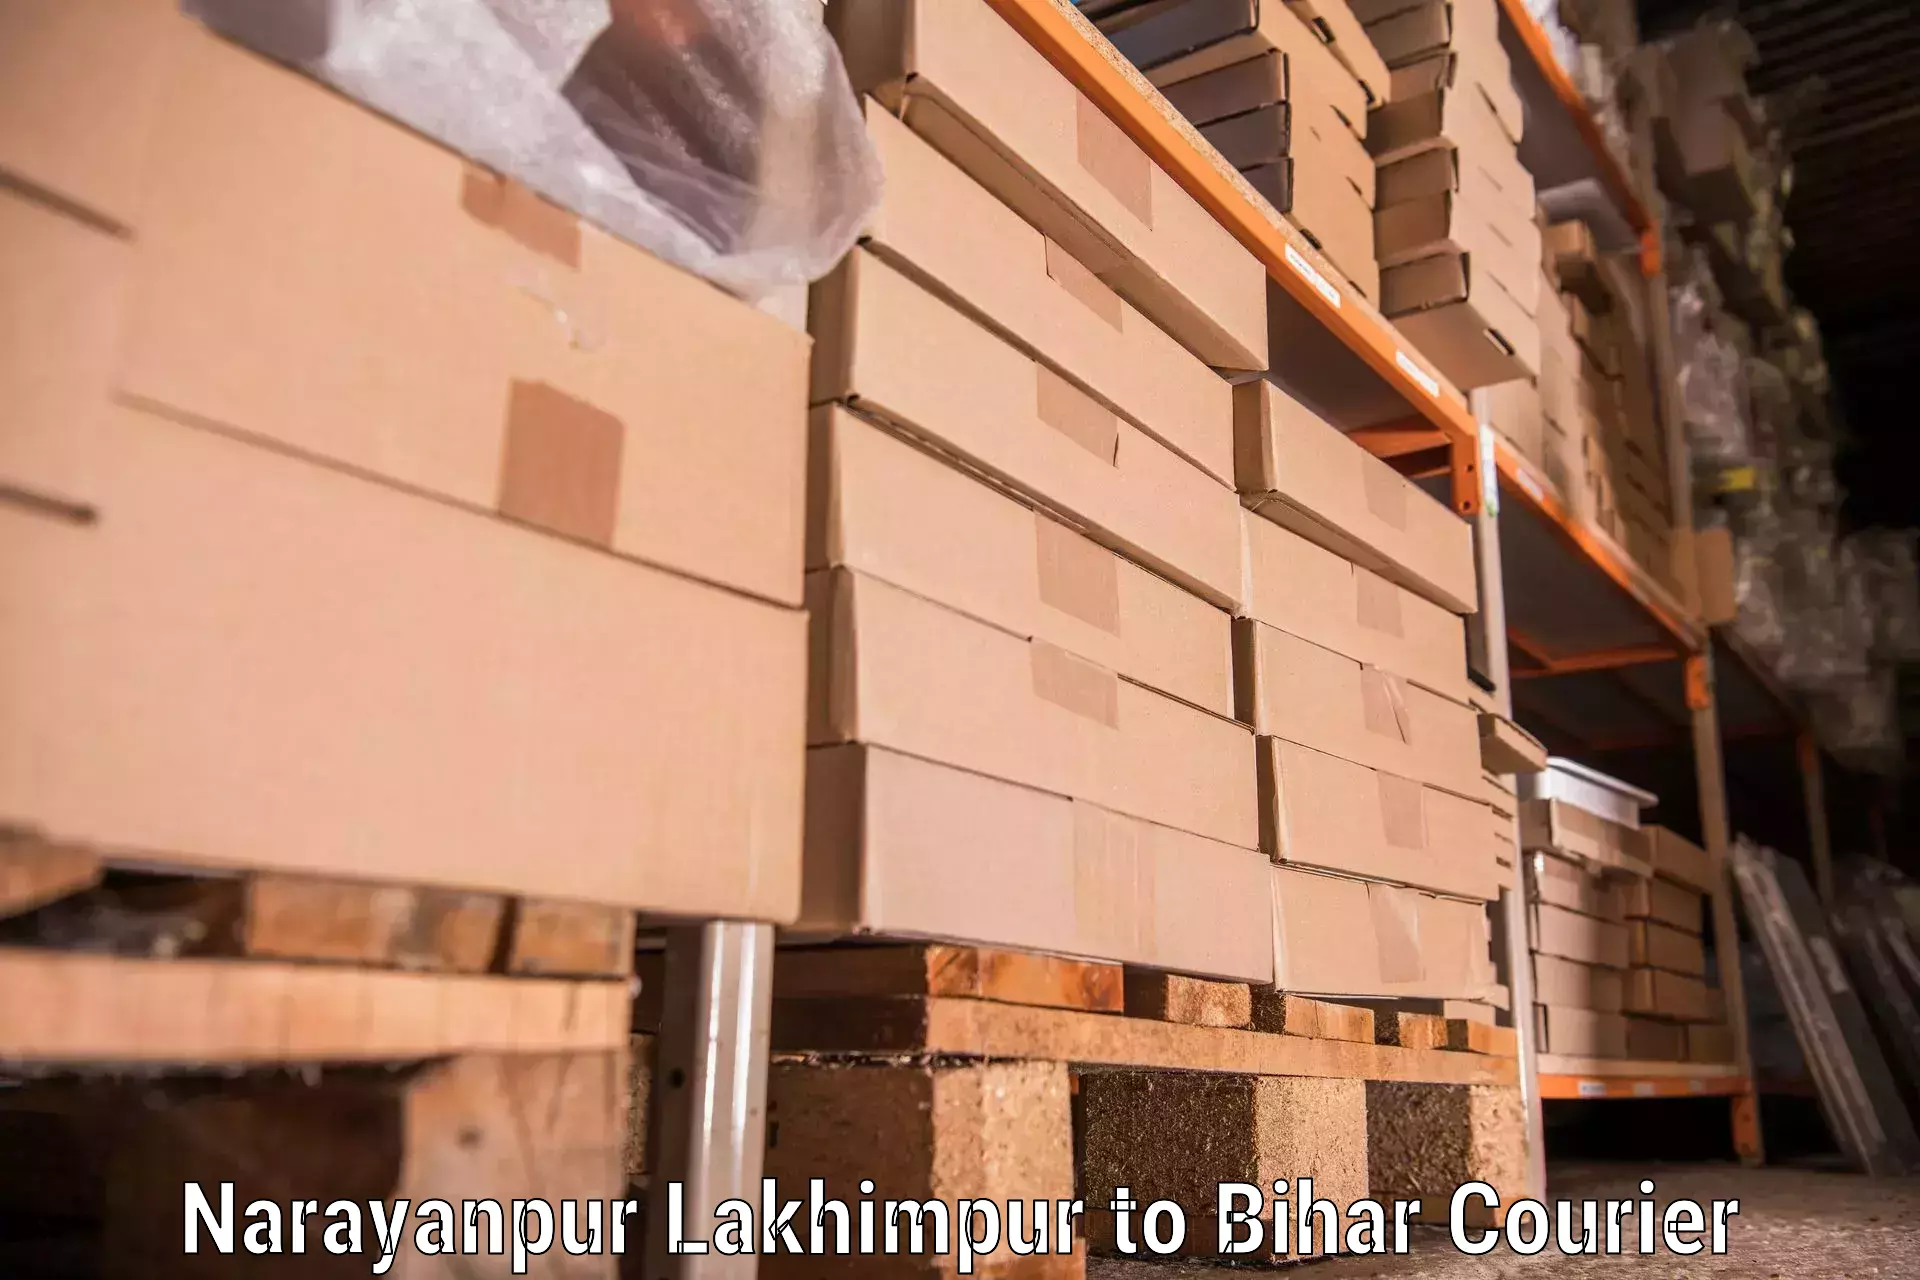 Quality moving and storage Narayanpur Lakhimpur to Makhdumpur